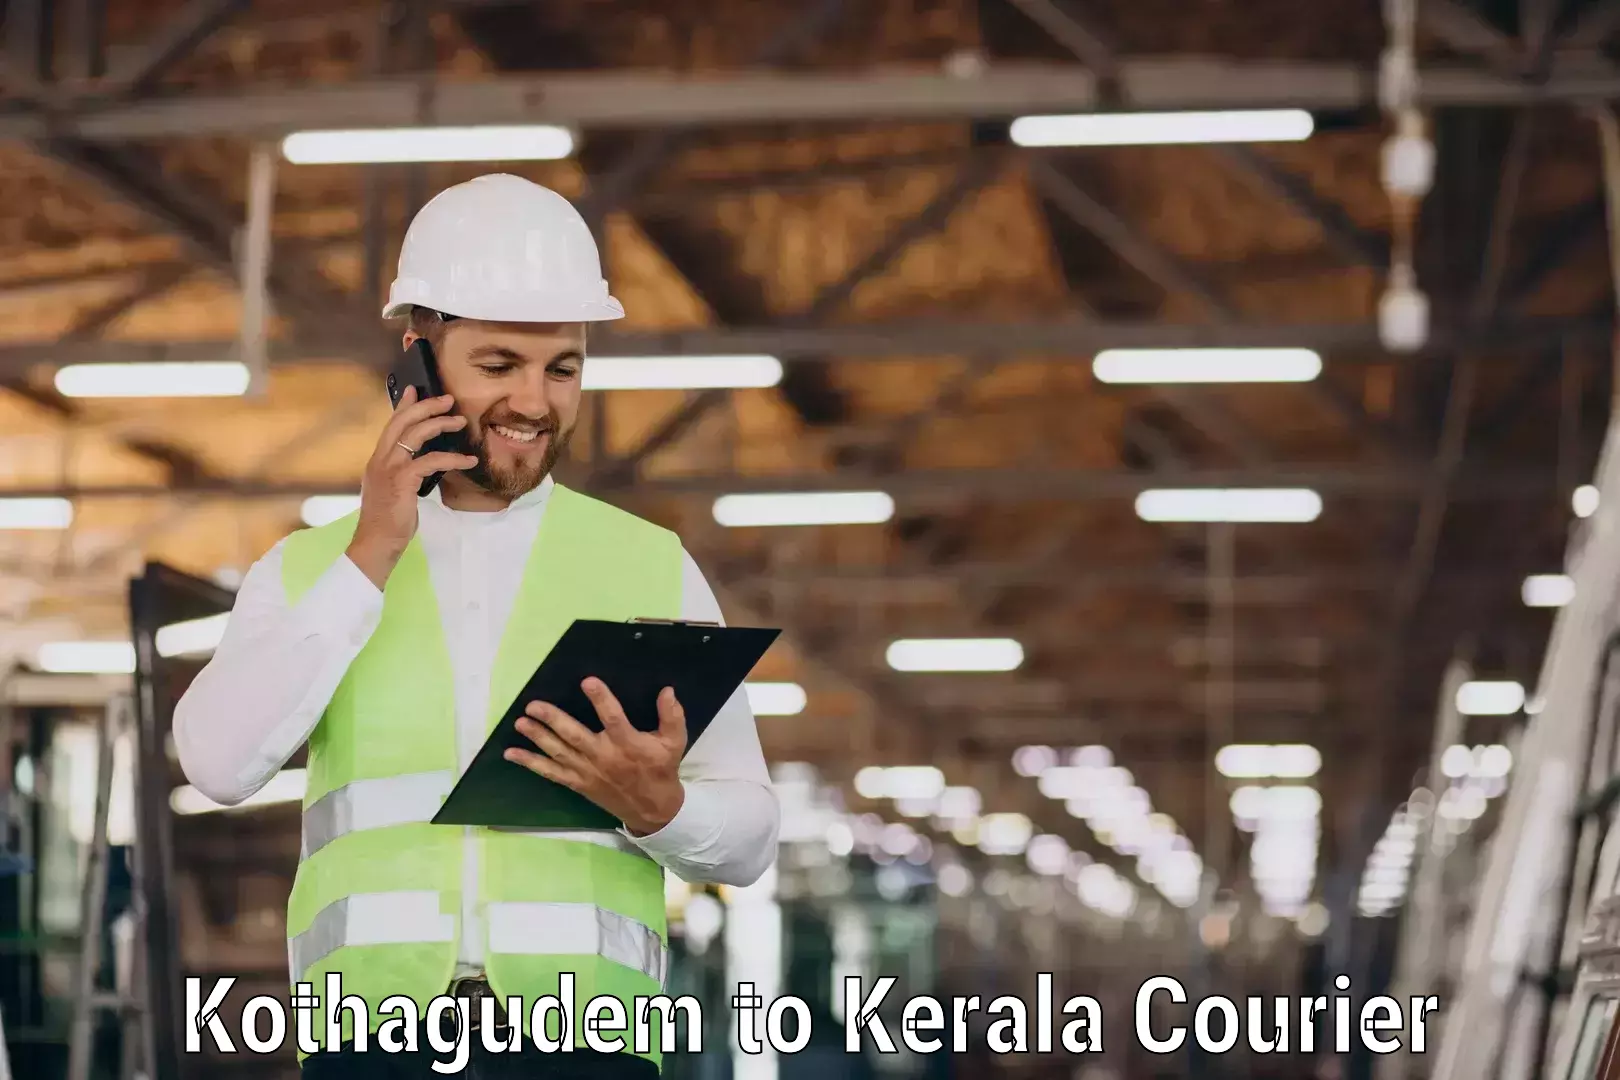 Global courier networks Kothagudem to Changanacherry